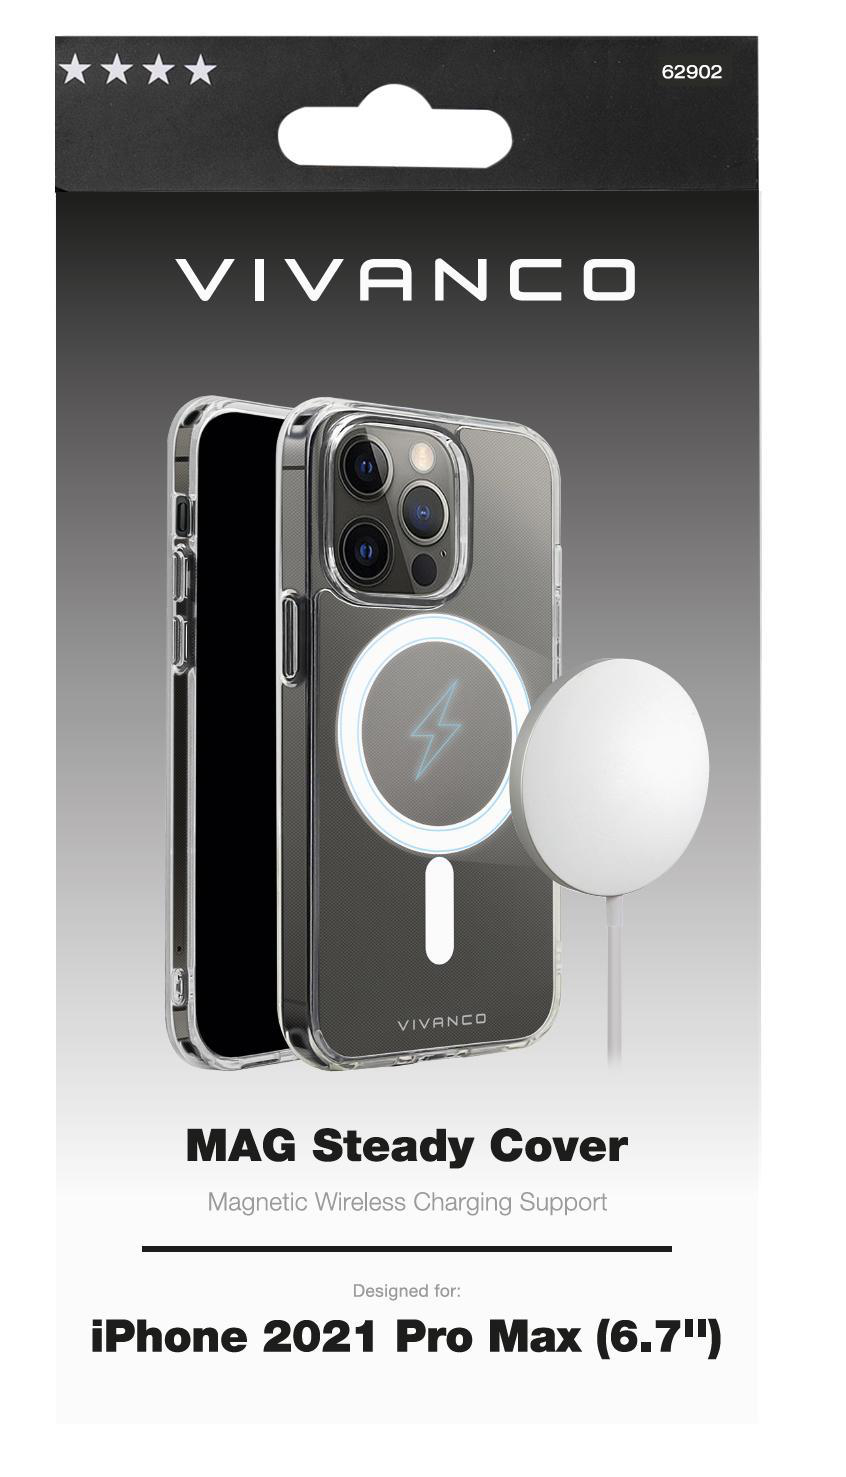 iPhone Apple, Mag Max, Transparent 13 Pro Backcover, Steady, VIVANCO